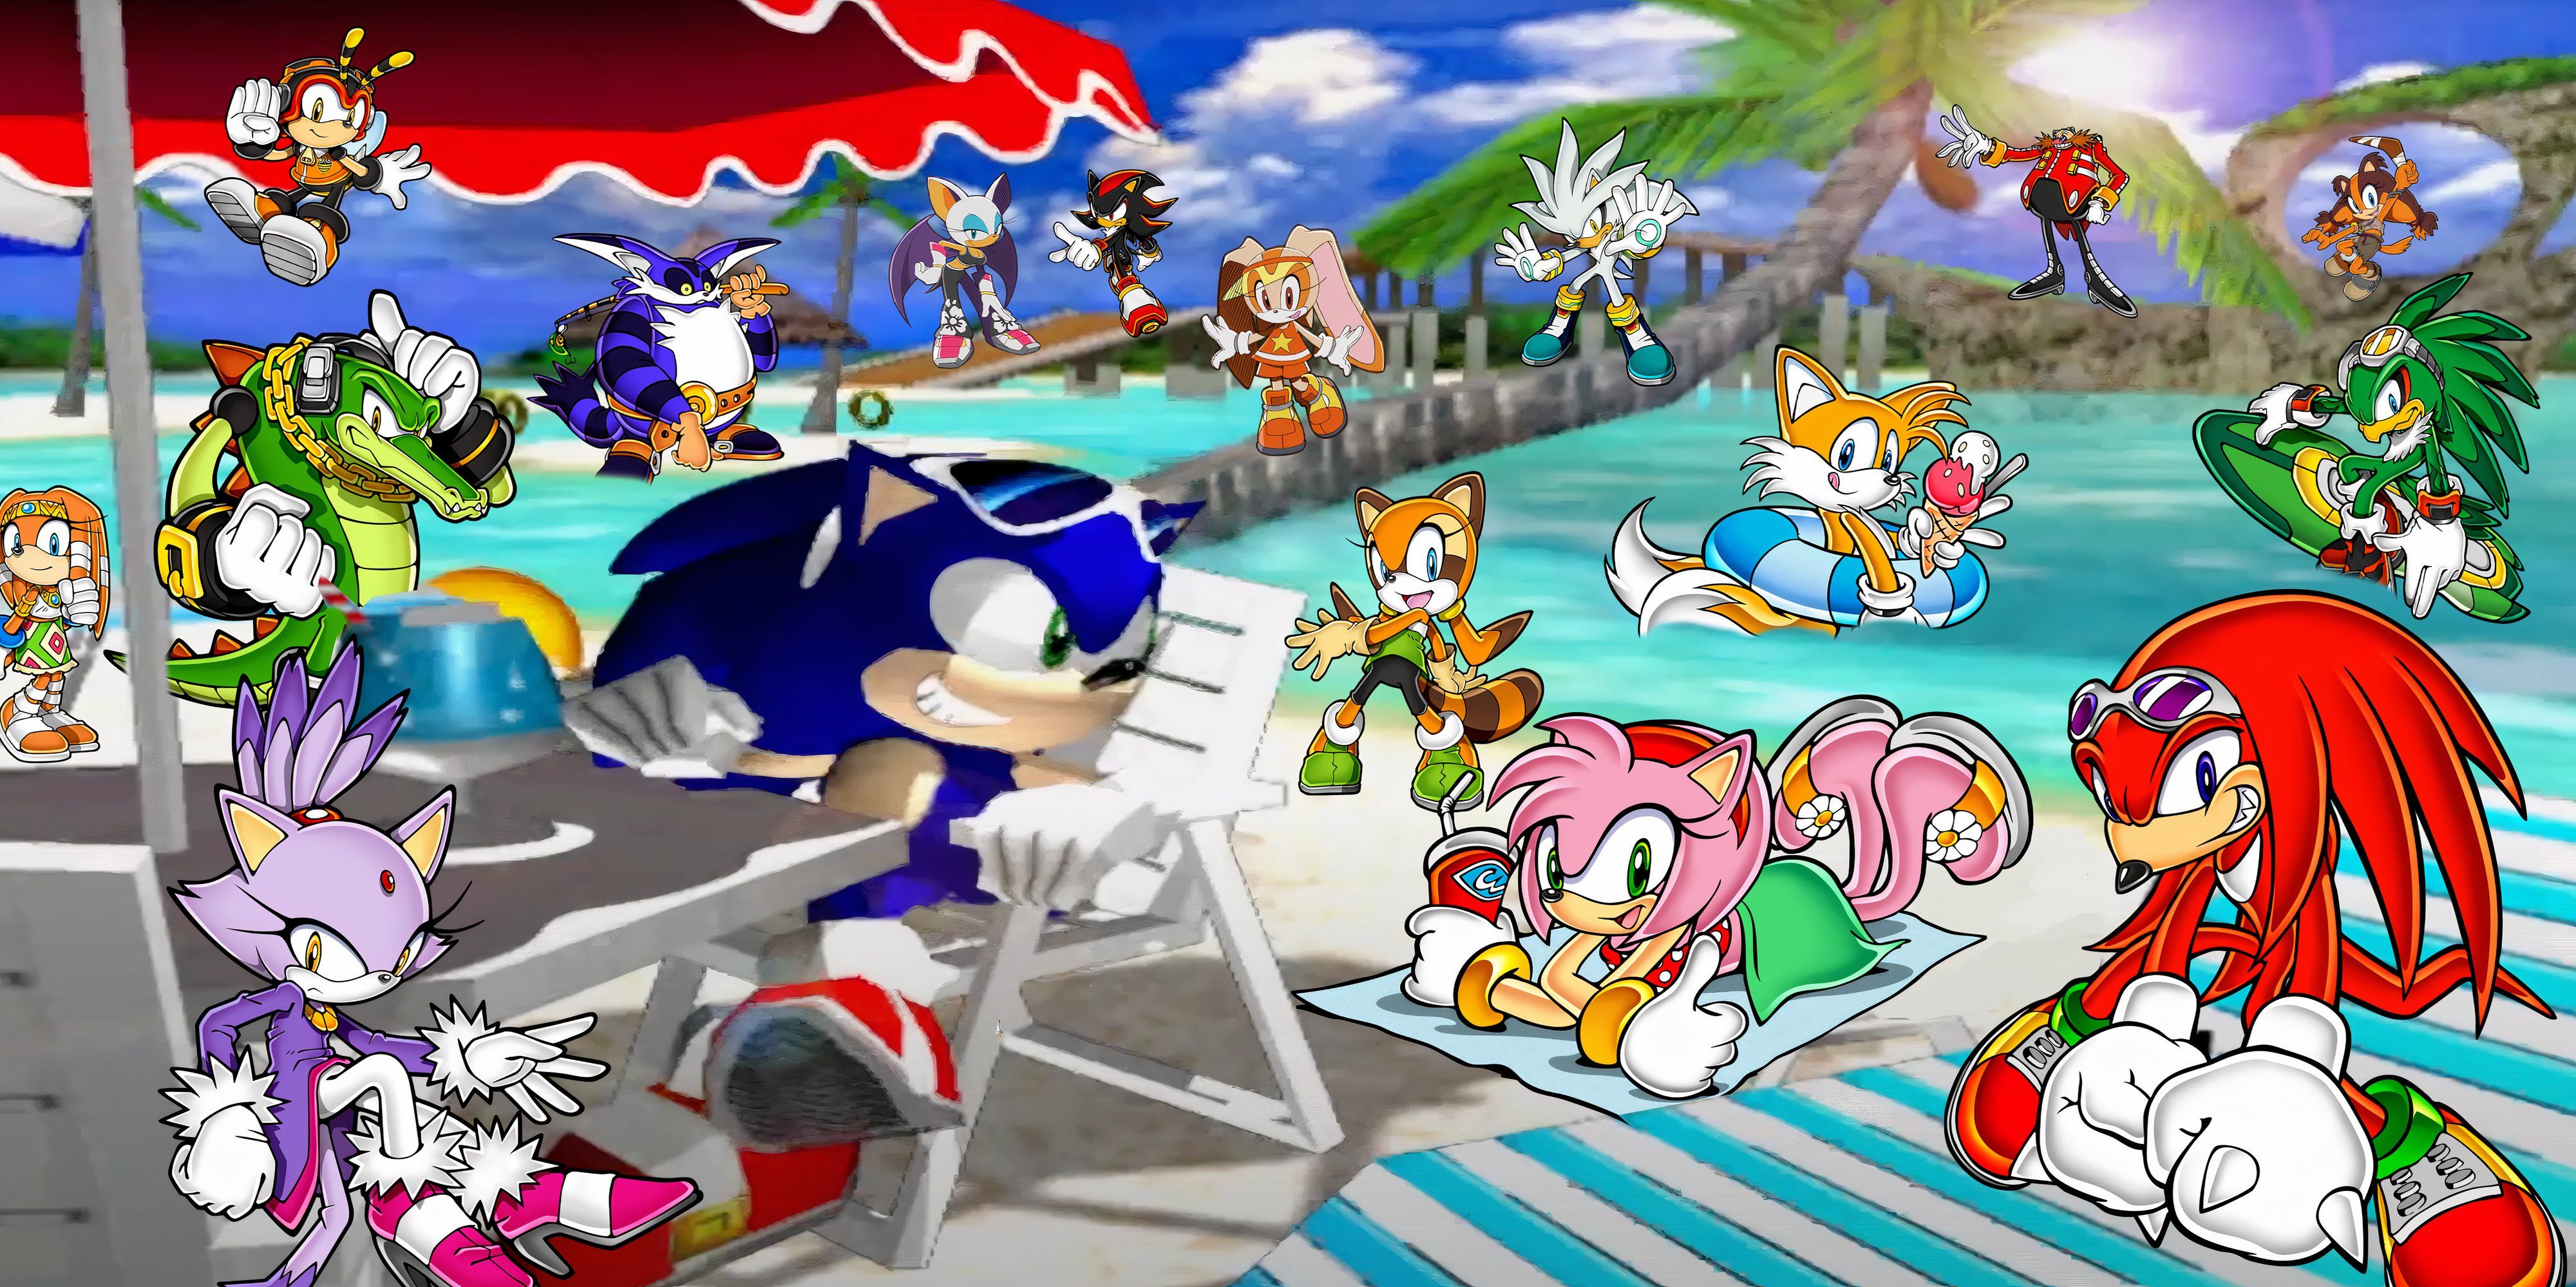 The ending image from Sonic's story in Sonic Adventure, with official artwork of multiple Sonic characters spaced around in it.